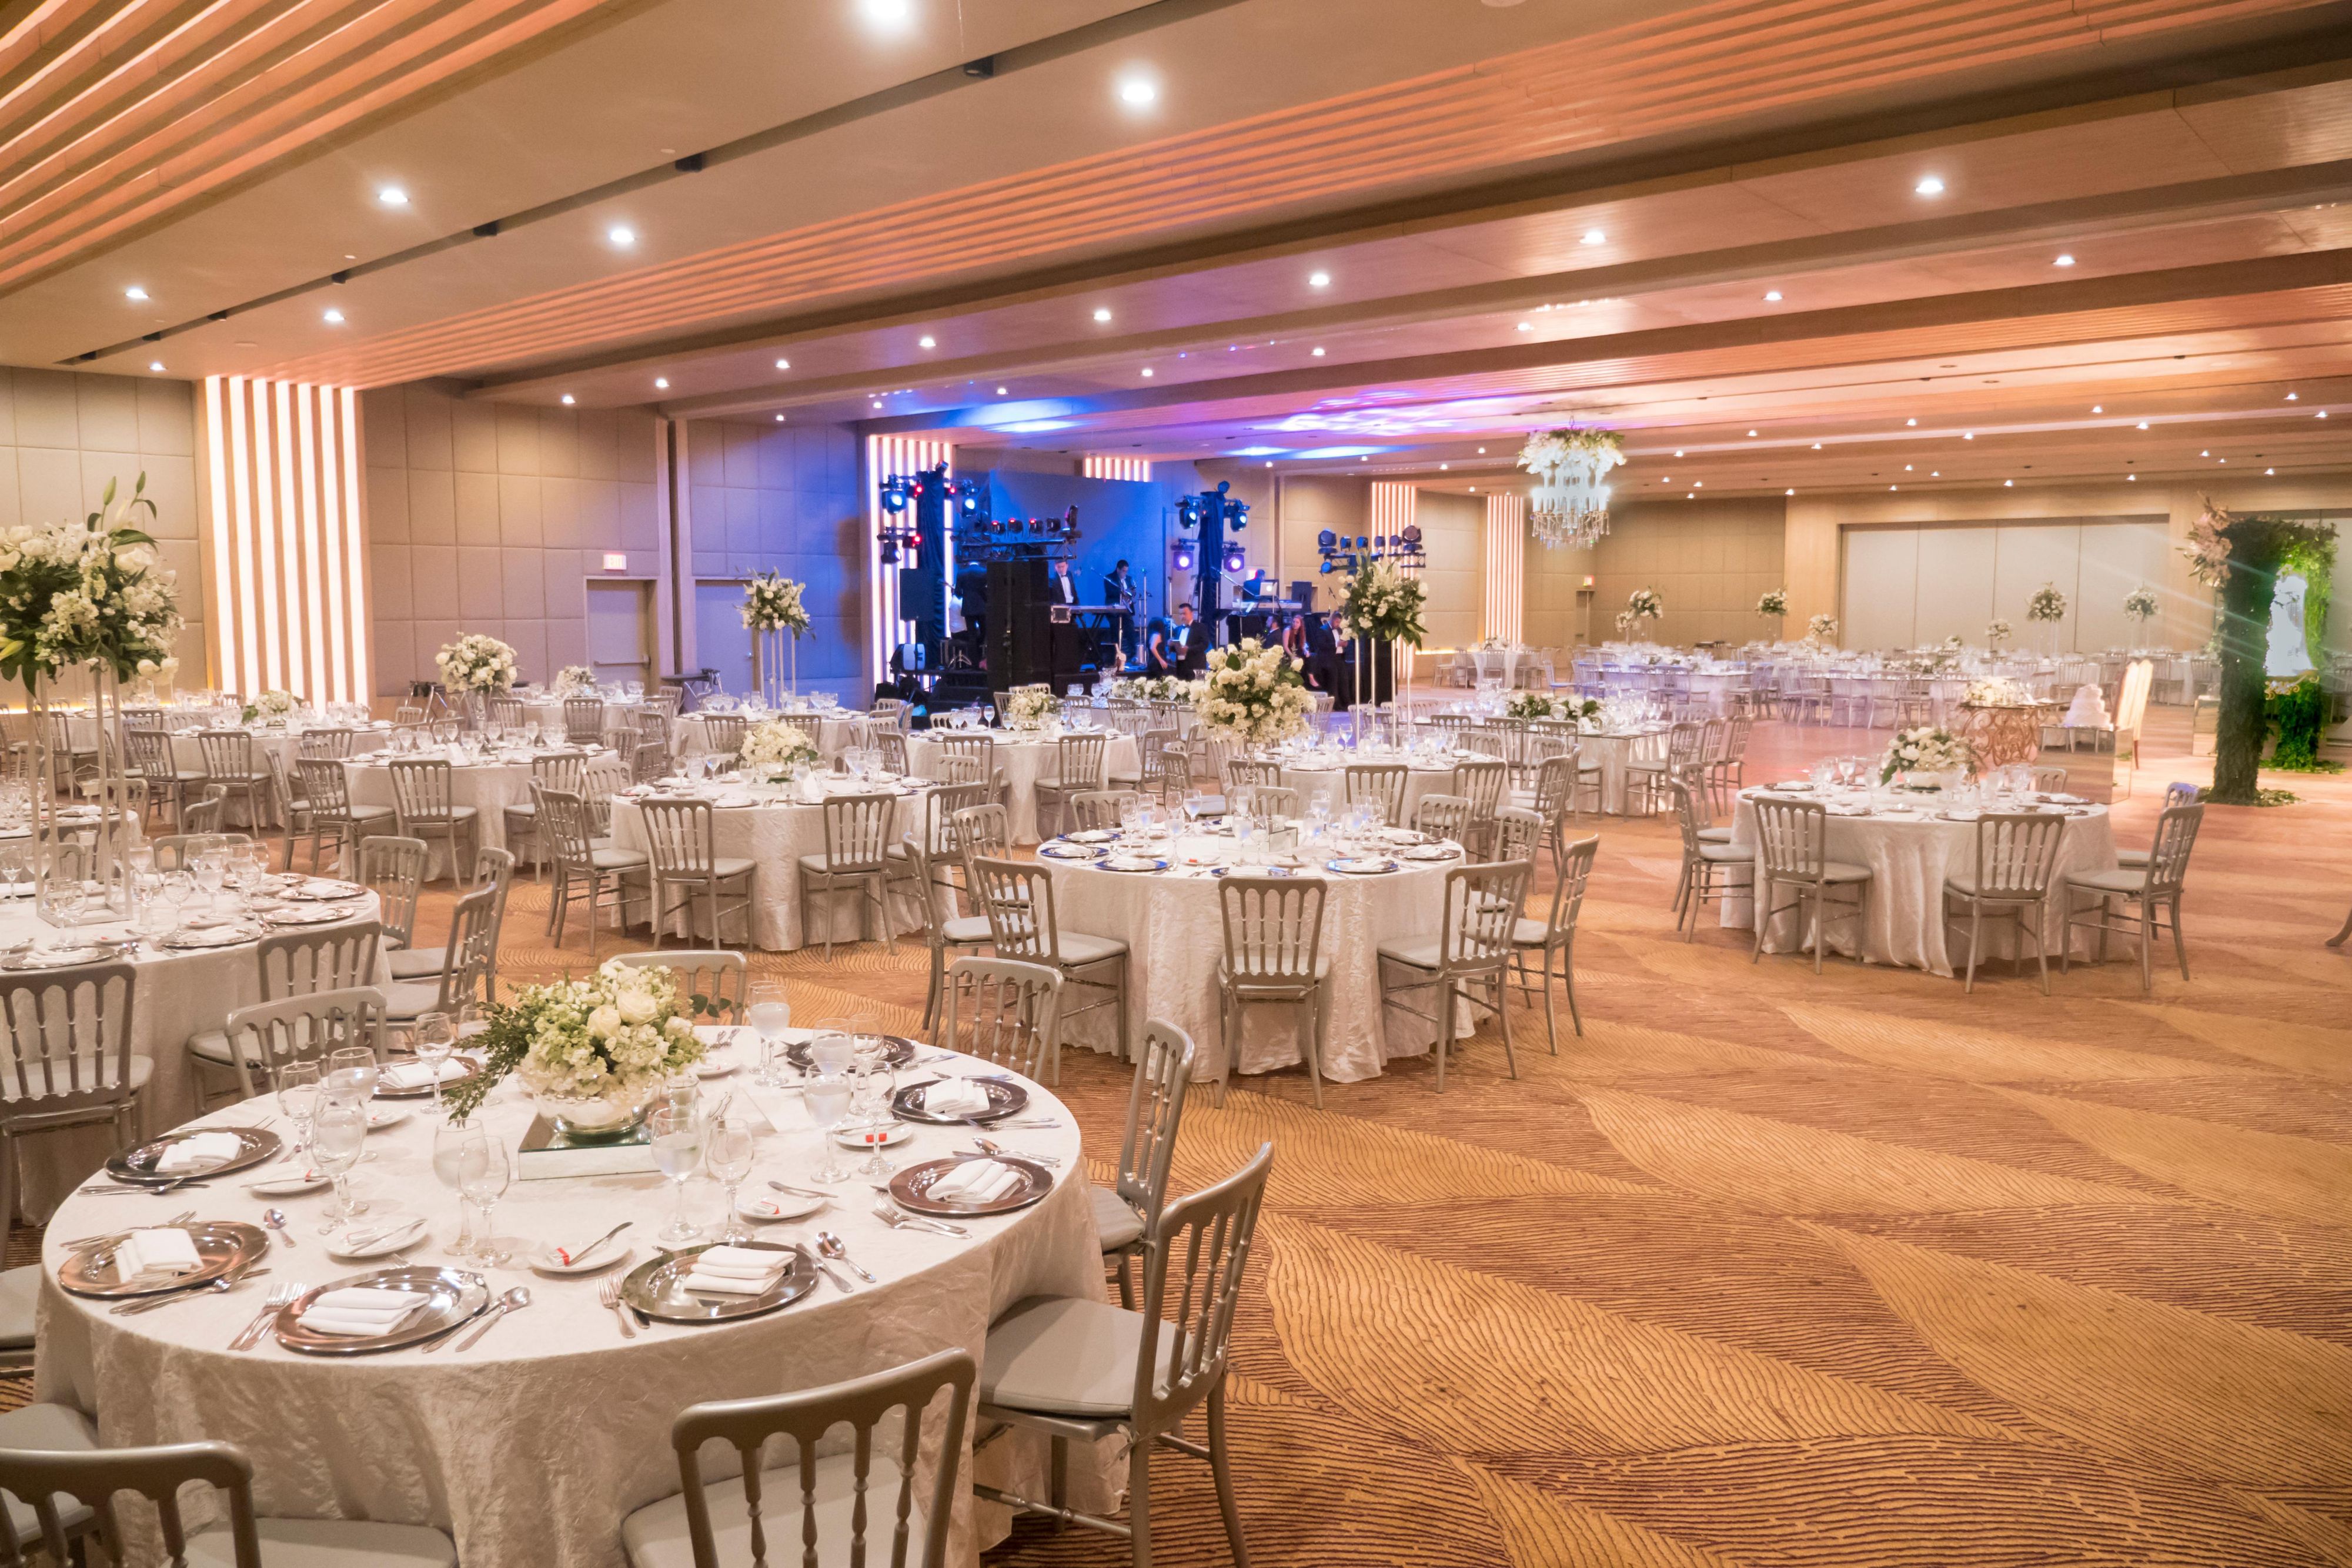 Let us take care of you and your event at Crowne Plaza Monterrey.